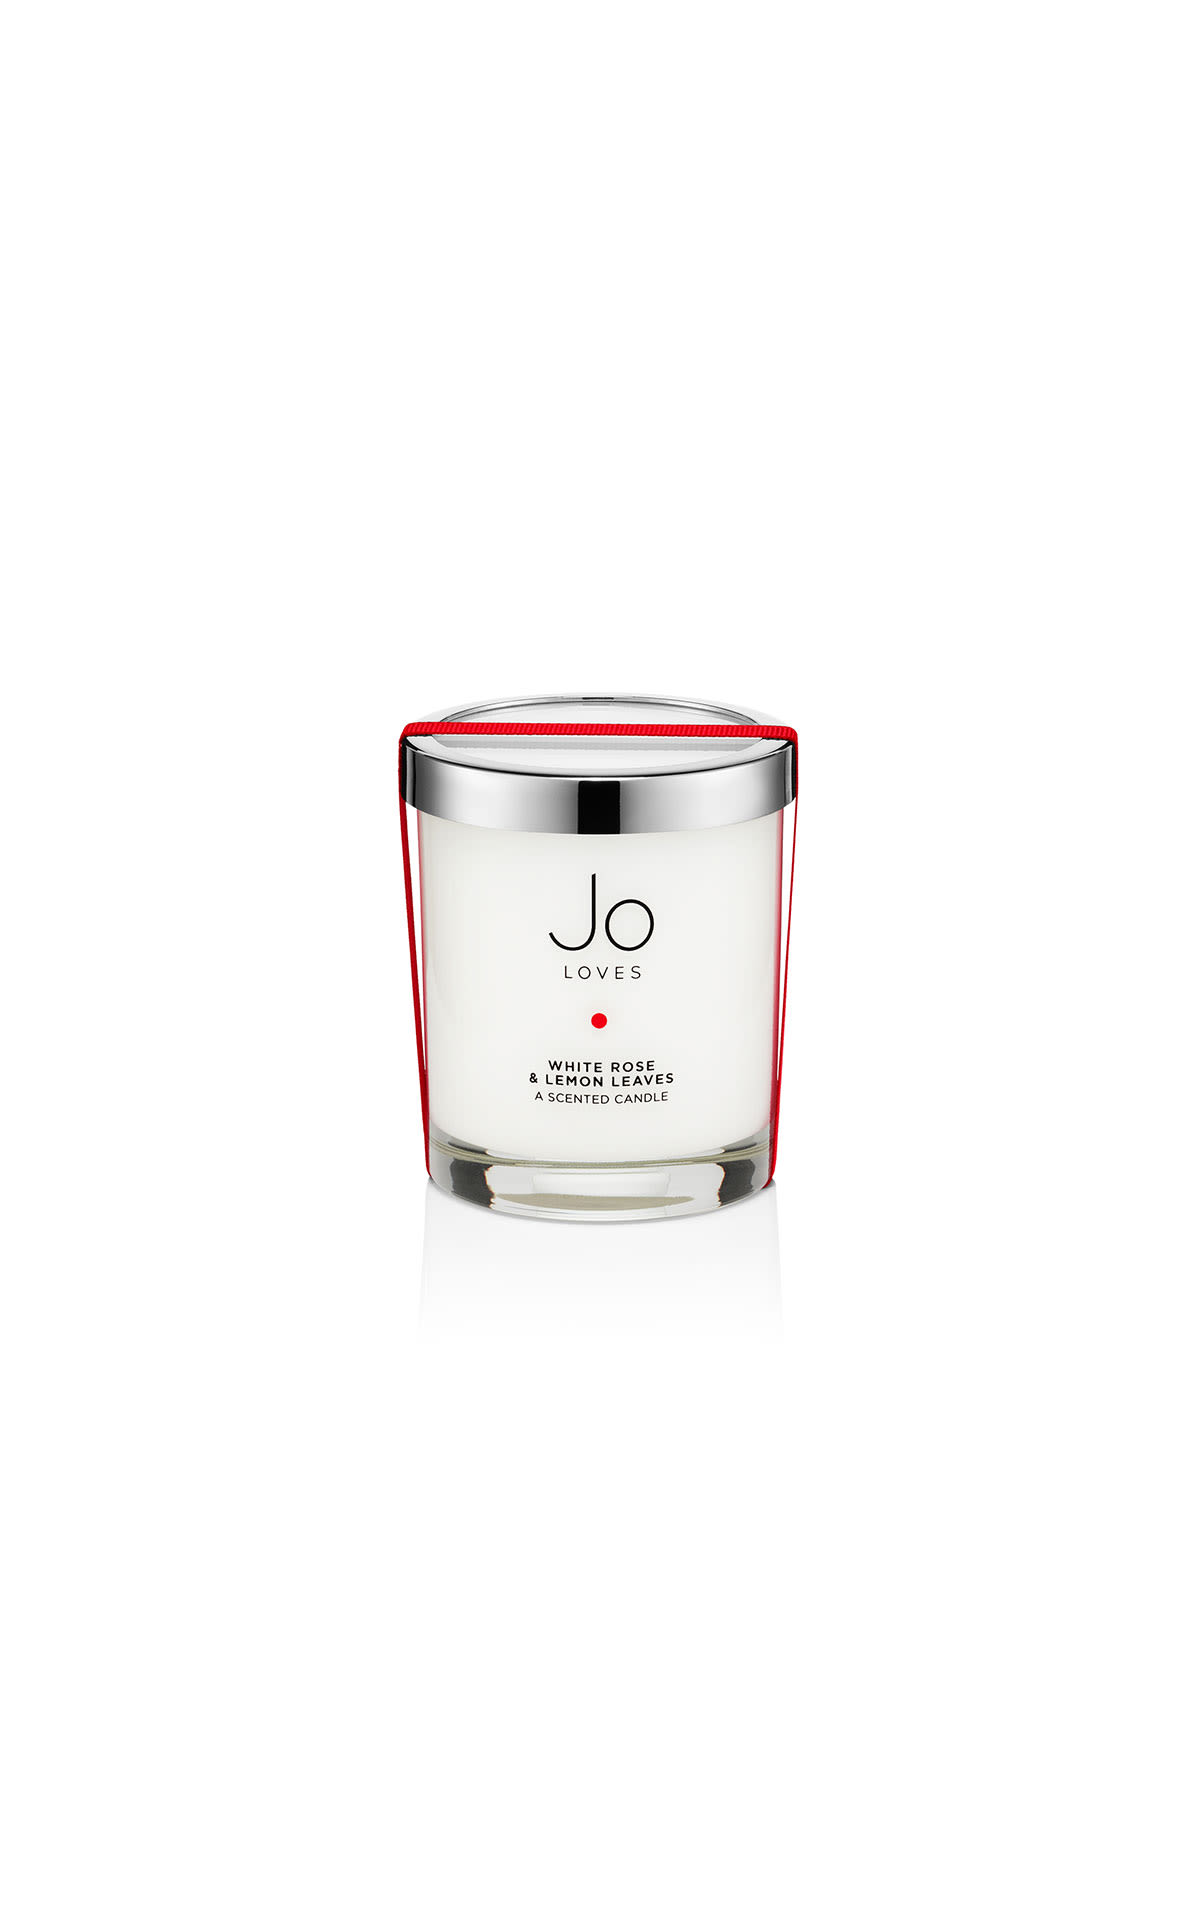 Jo Loves A home candle in white rose and lemon leaves from Bicester Village